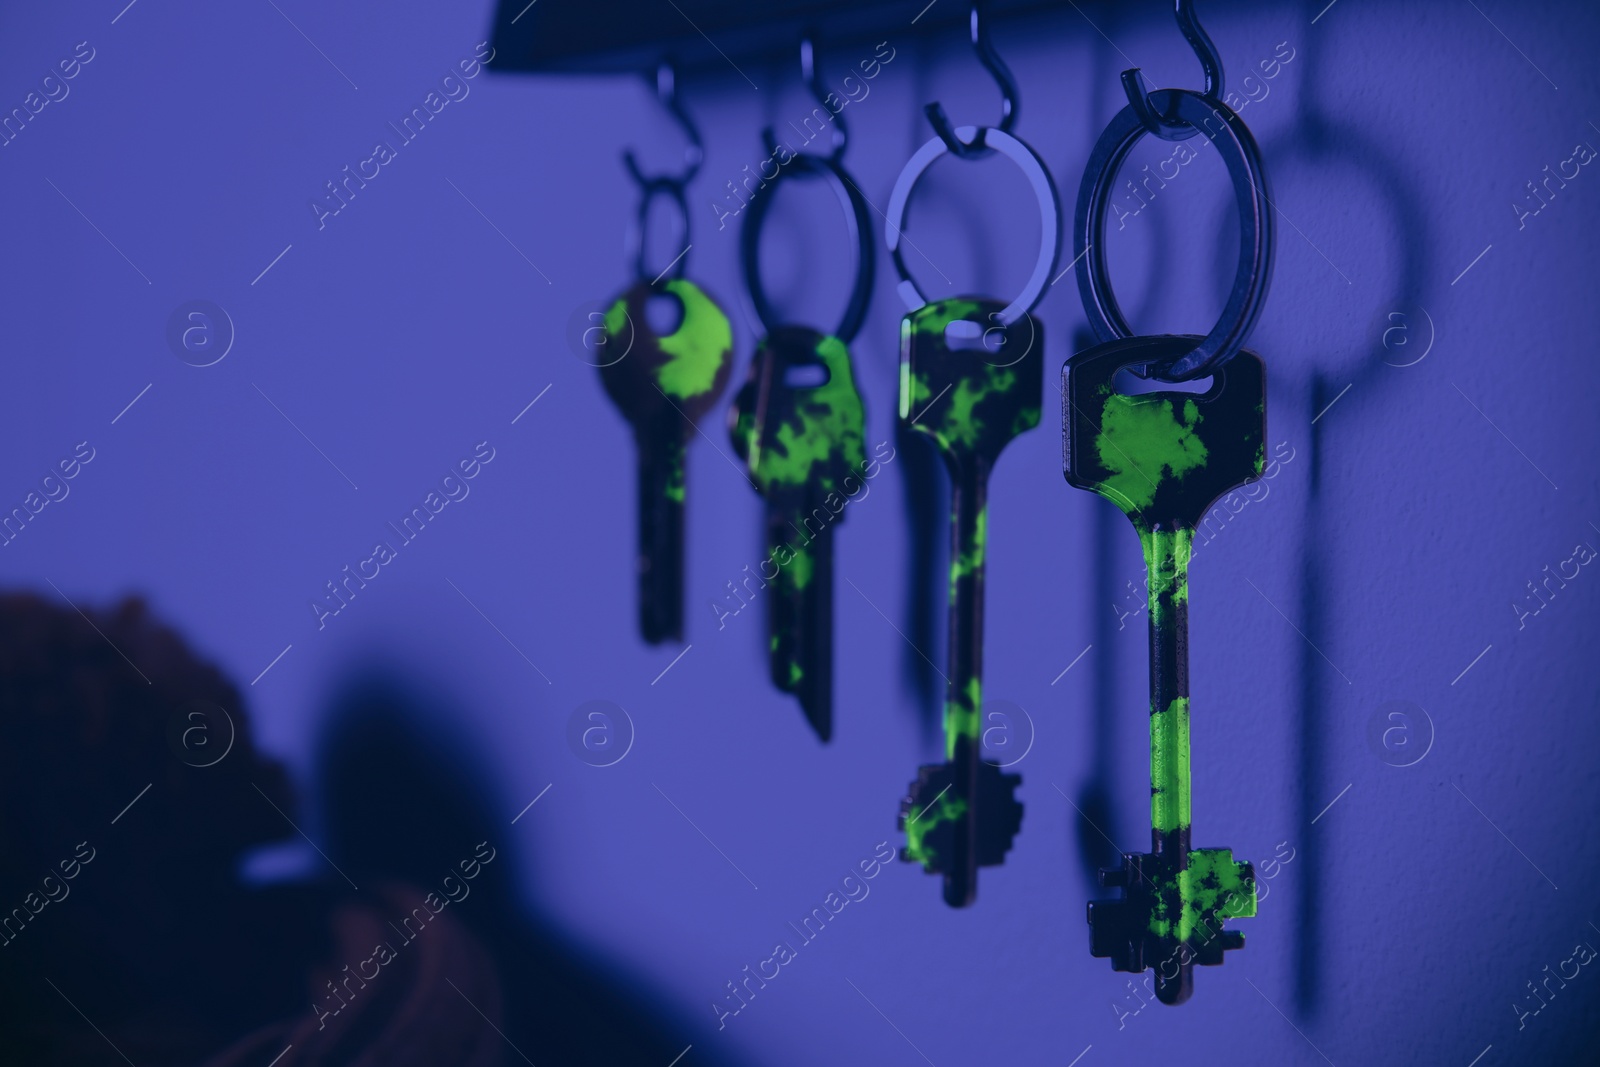 Image of Holder with different keys on wall, view under UV light. Sanitizing objects during coronavirus outbreak